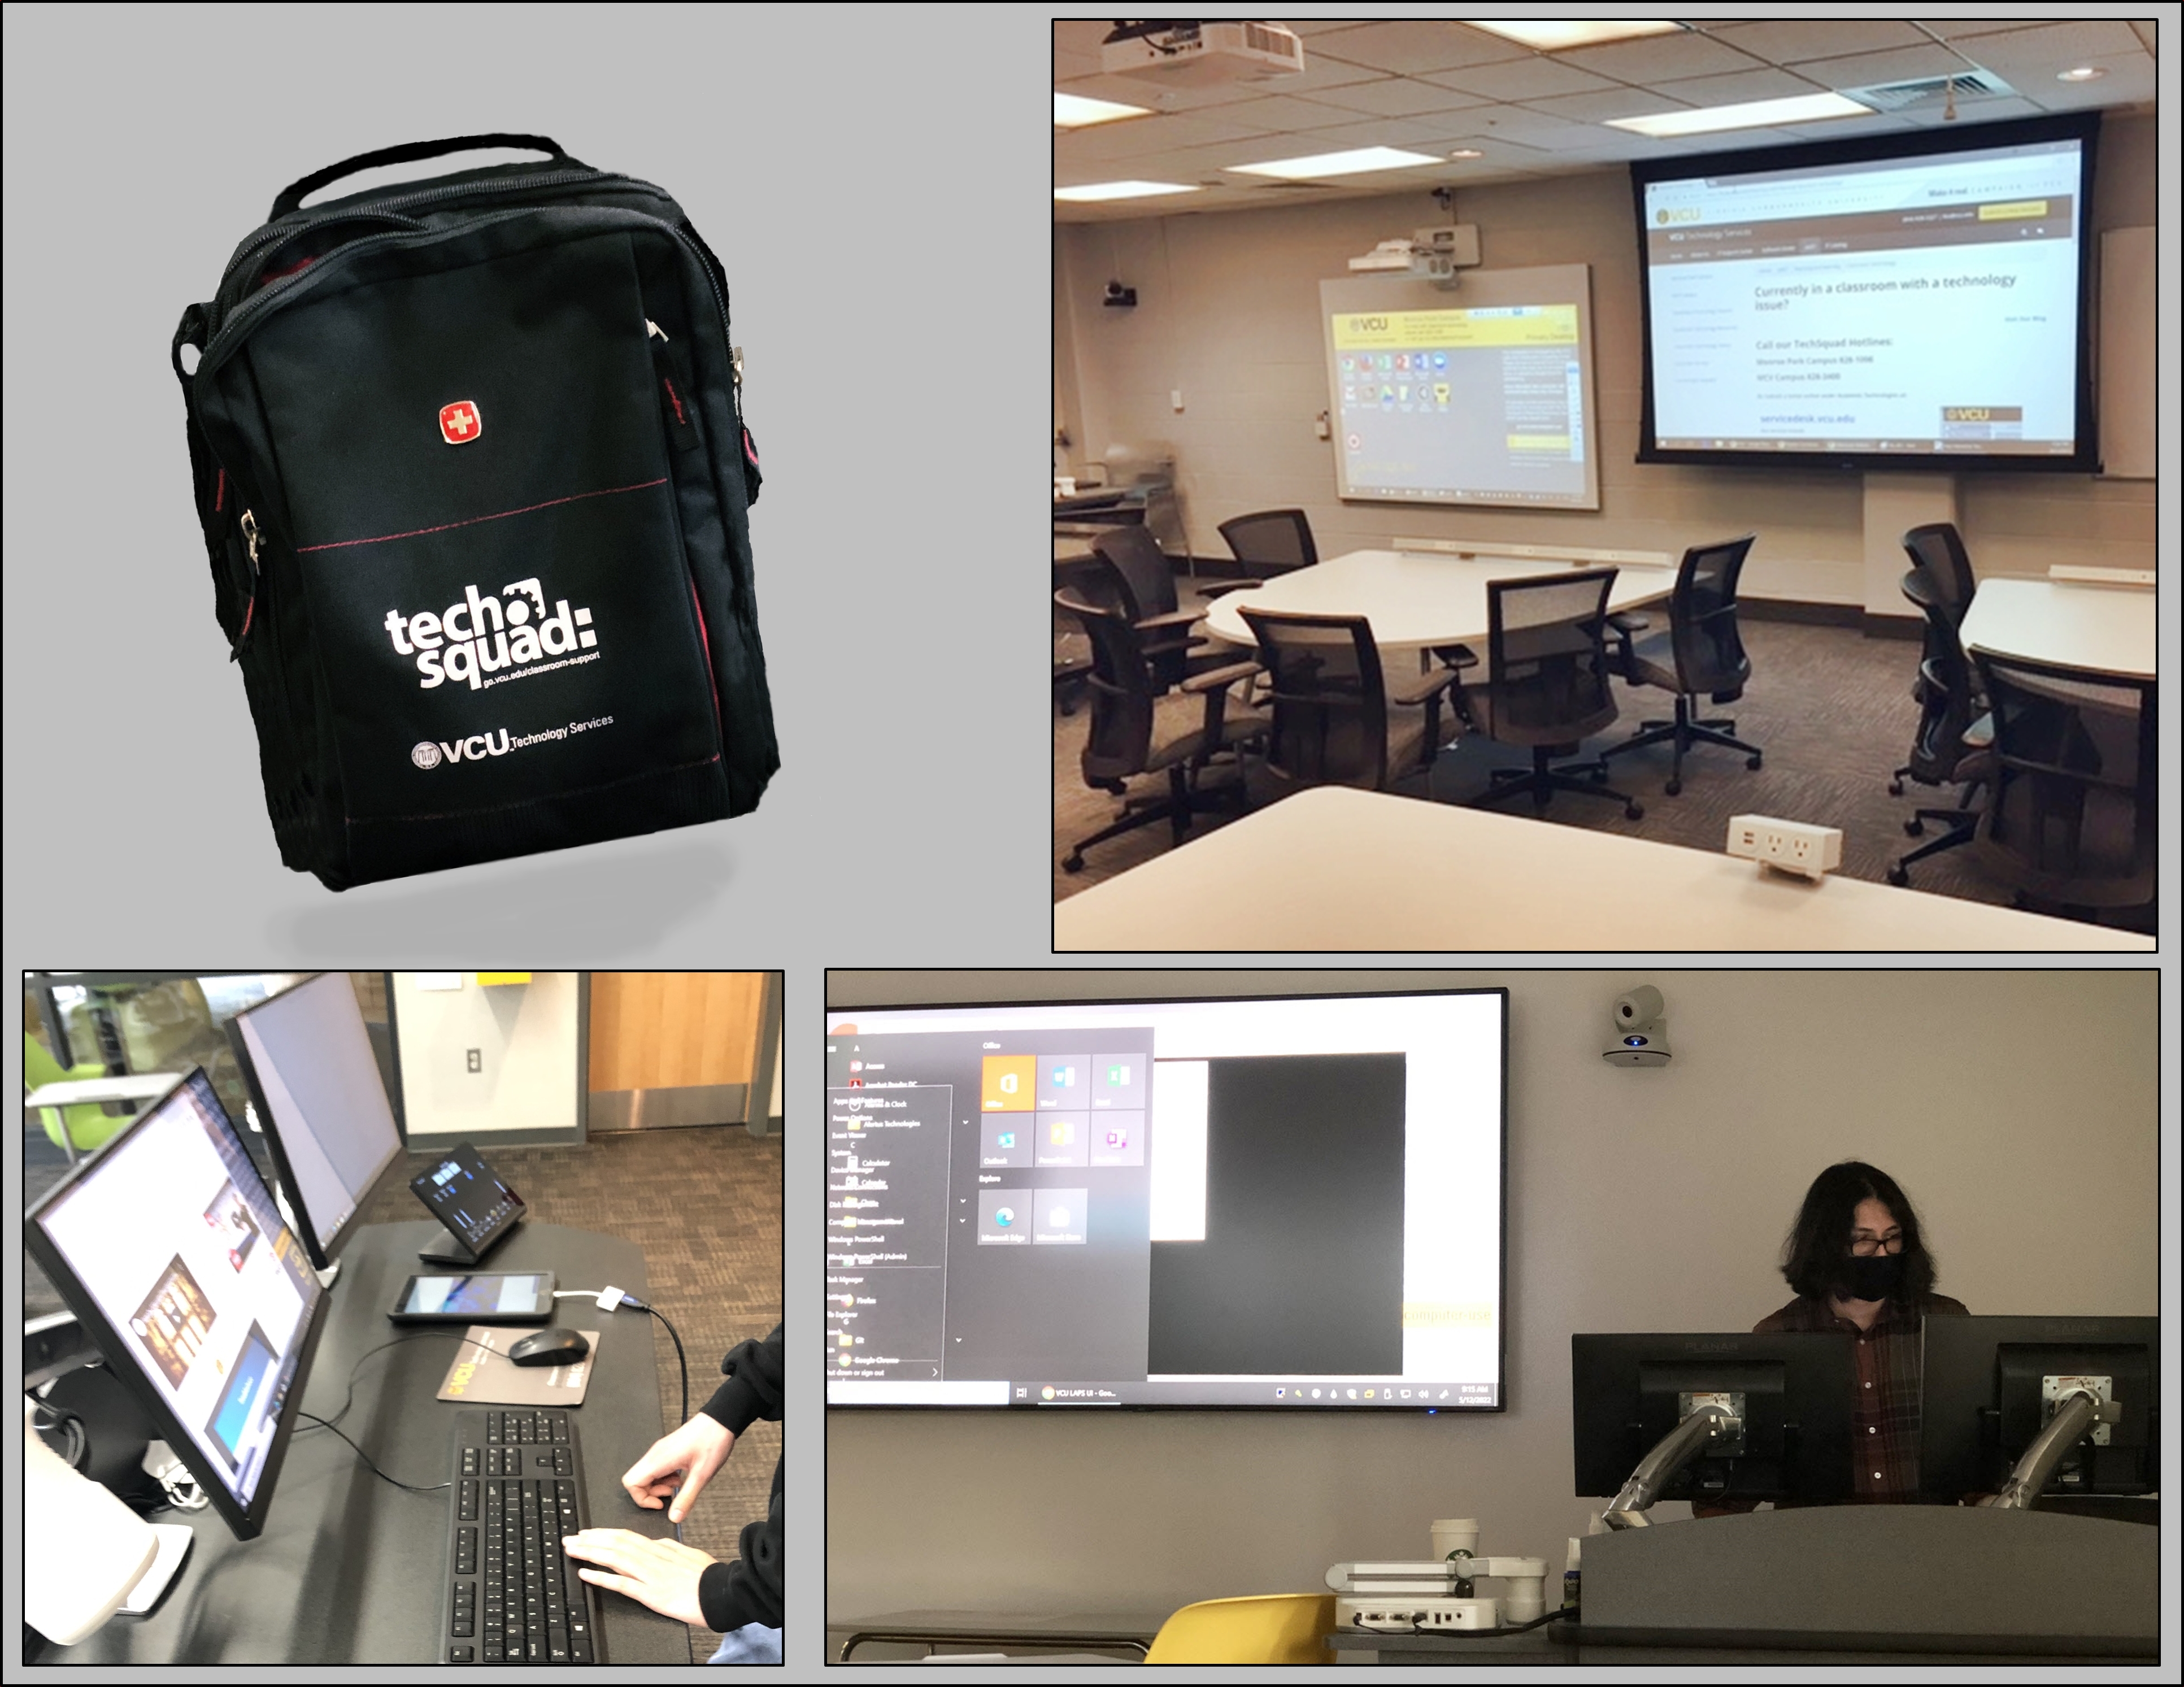 images of VCU classroom technologies